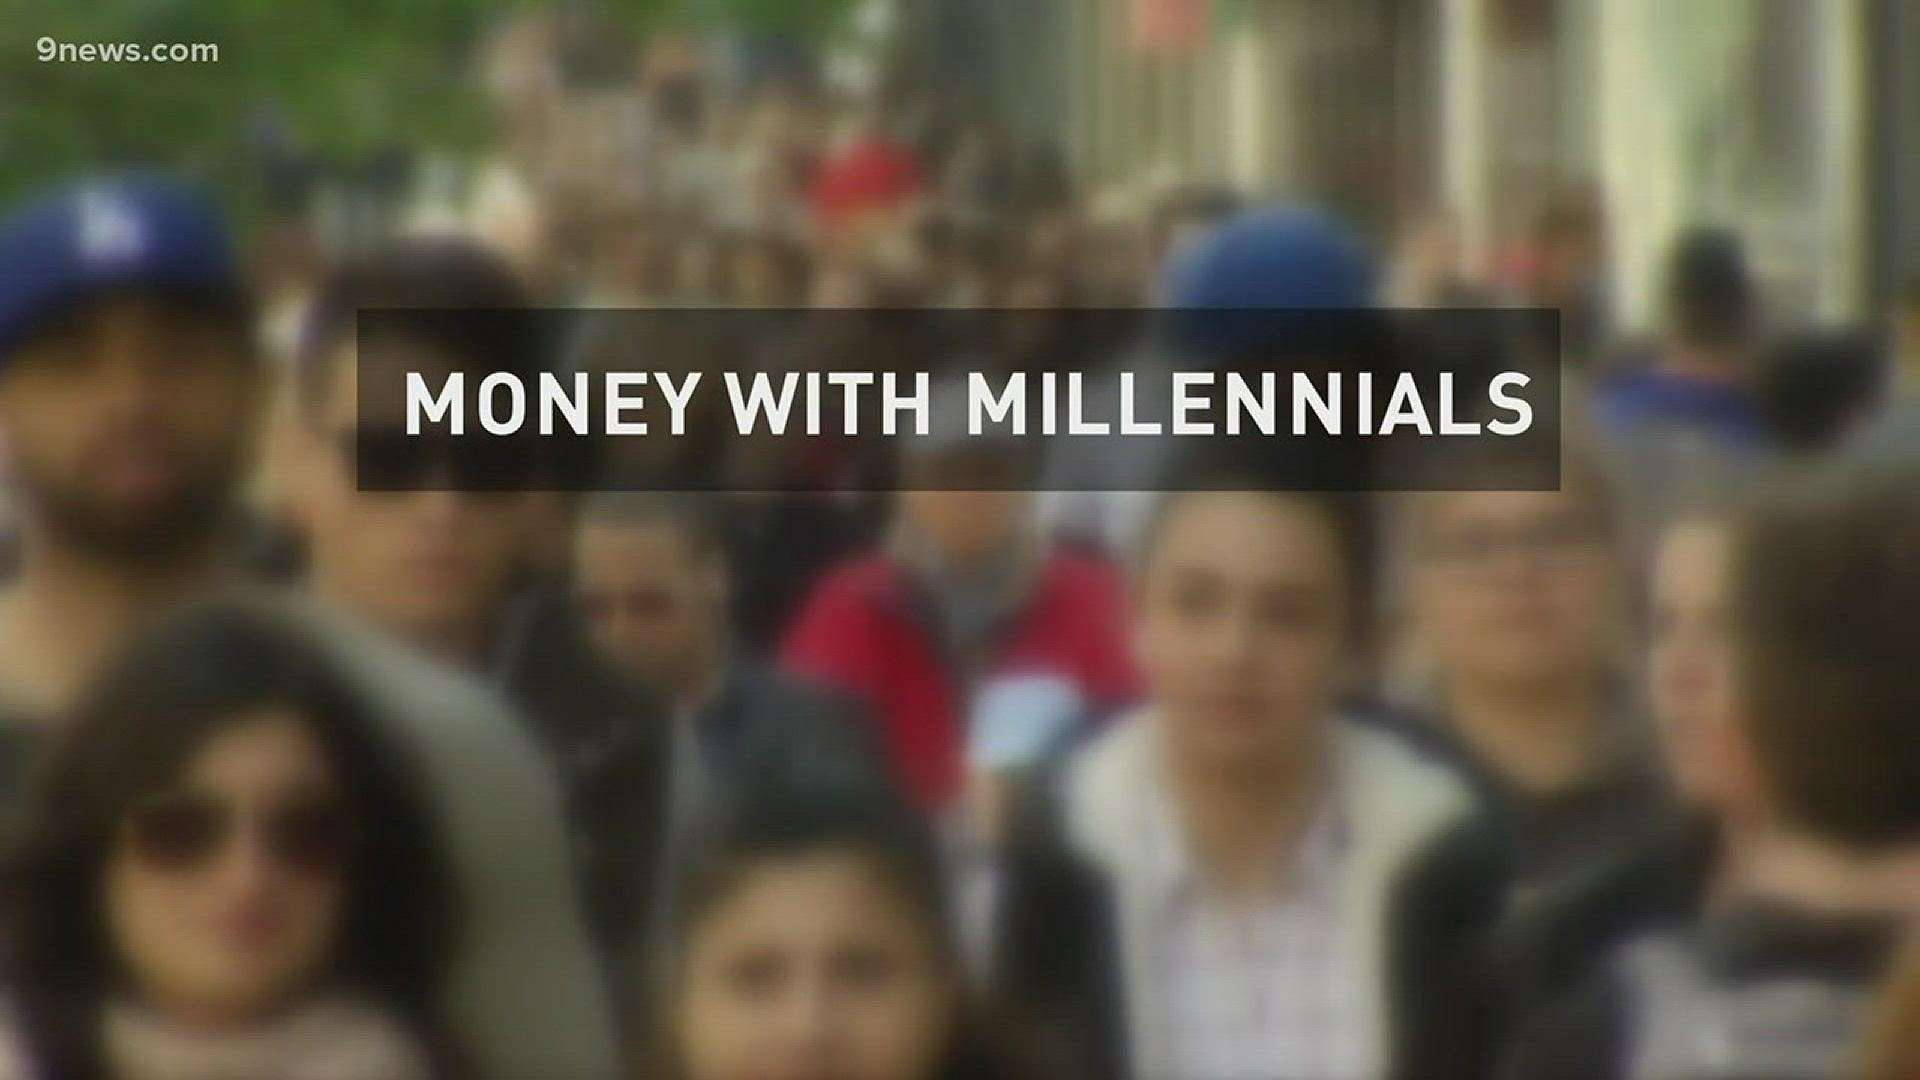 Money is a big source of stress for millennials. Here's a look at the biggest money mistakes and how to fix them.